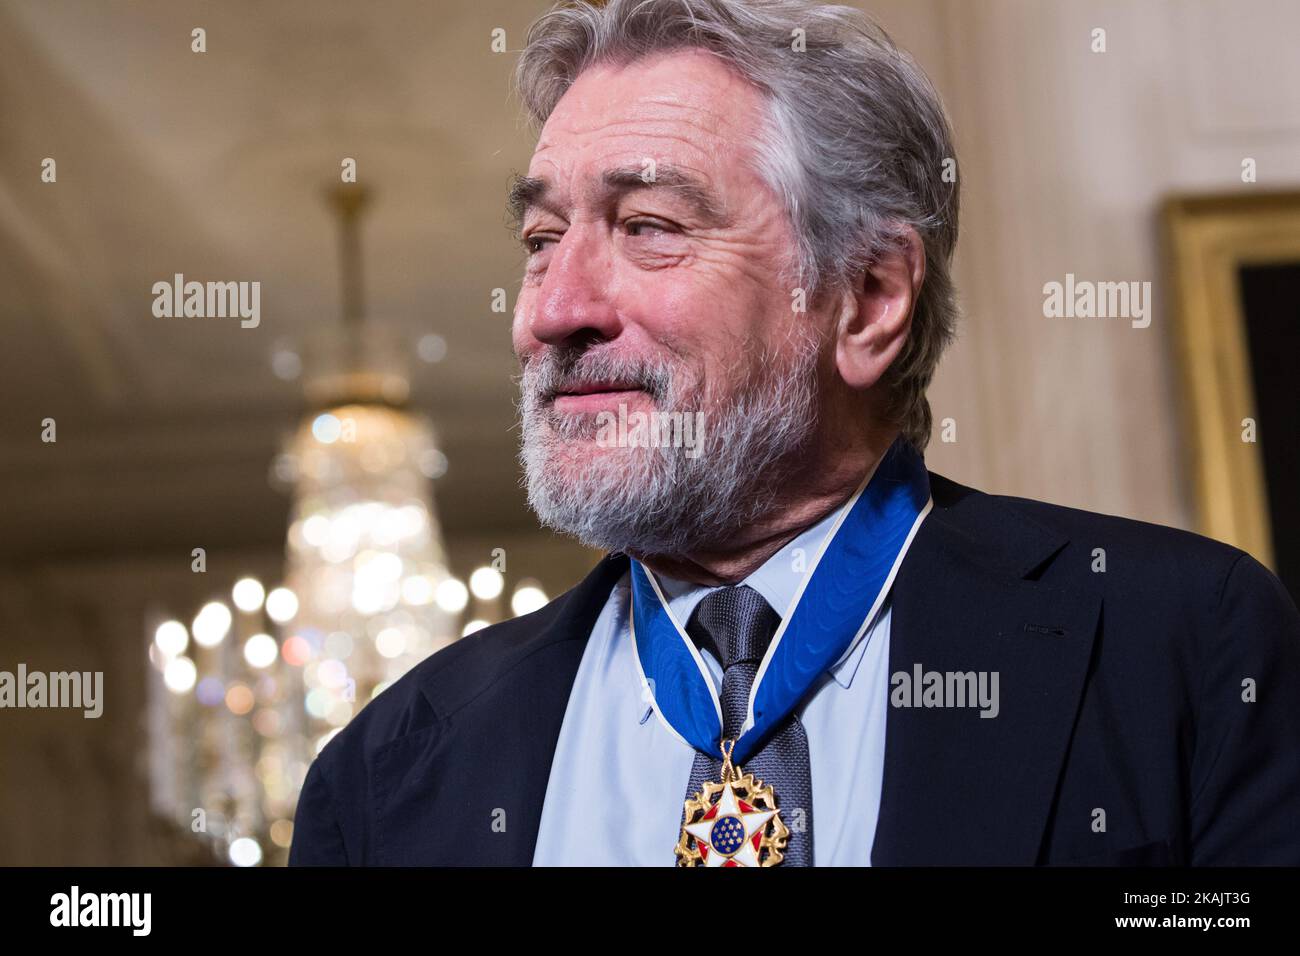 Presidential Medal of Freedom awardee, actor Robert De Niro, answered questions from reporters, after receiving the Presidential Medal of Freedomat at the East Room of the White House November 22, 2016 in Washington, DC. The Presidential Medal of Freedom is the highest honor for civilians in the United States of America. (Photo by Cheriss May/NurPhoto) *** Please Use Credit from Credit Field *** Stock Photo